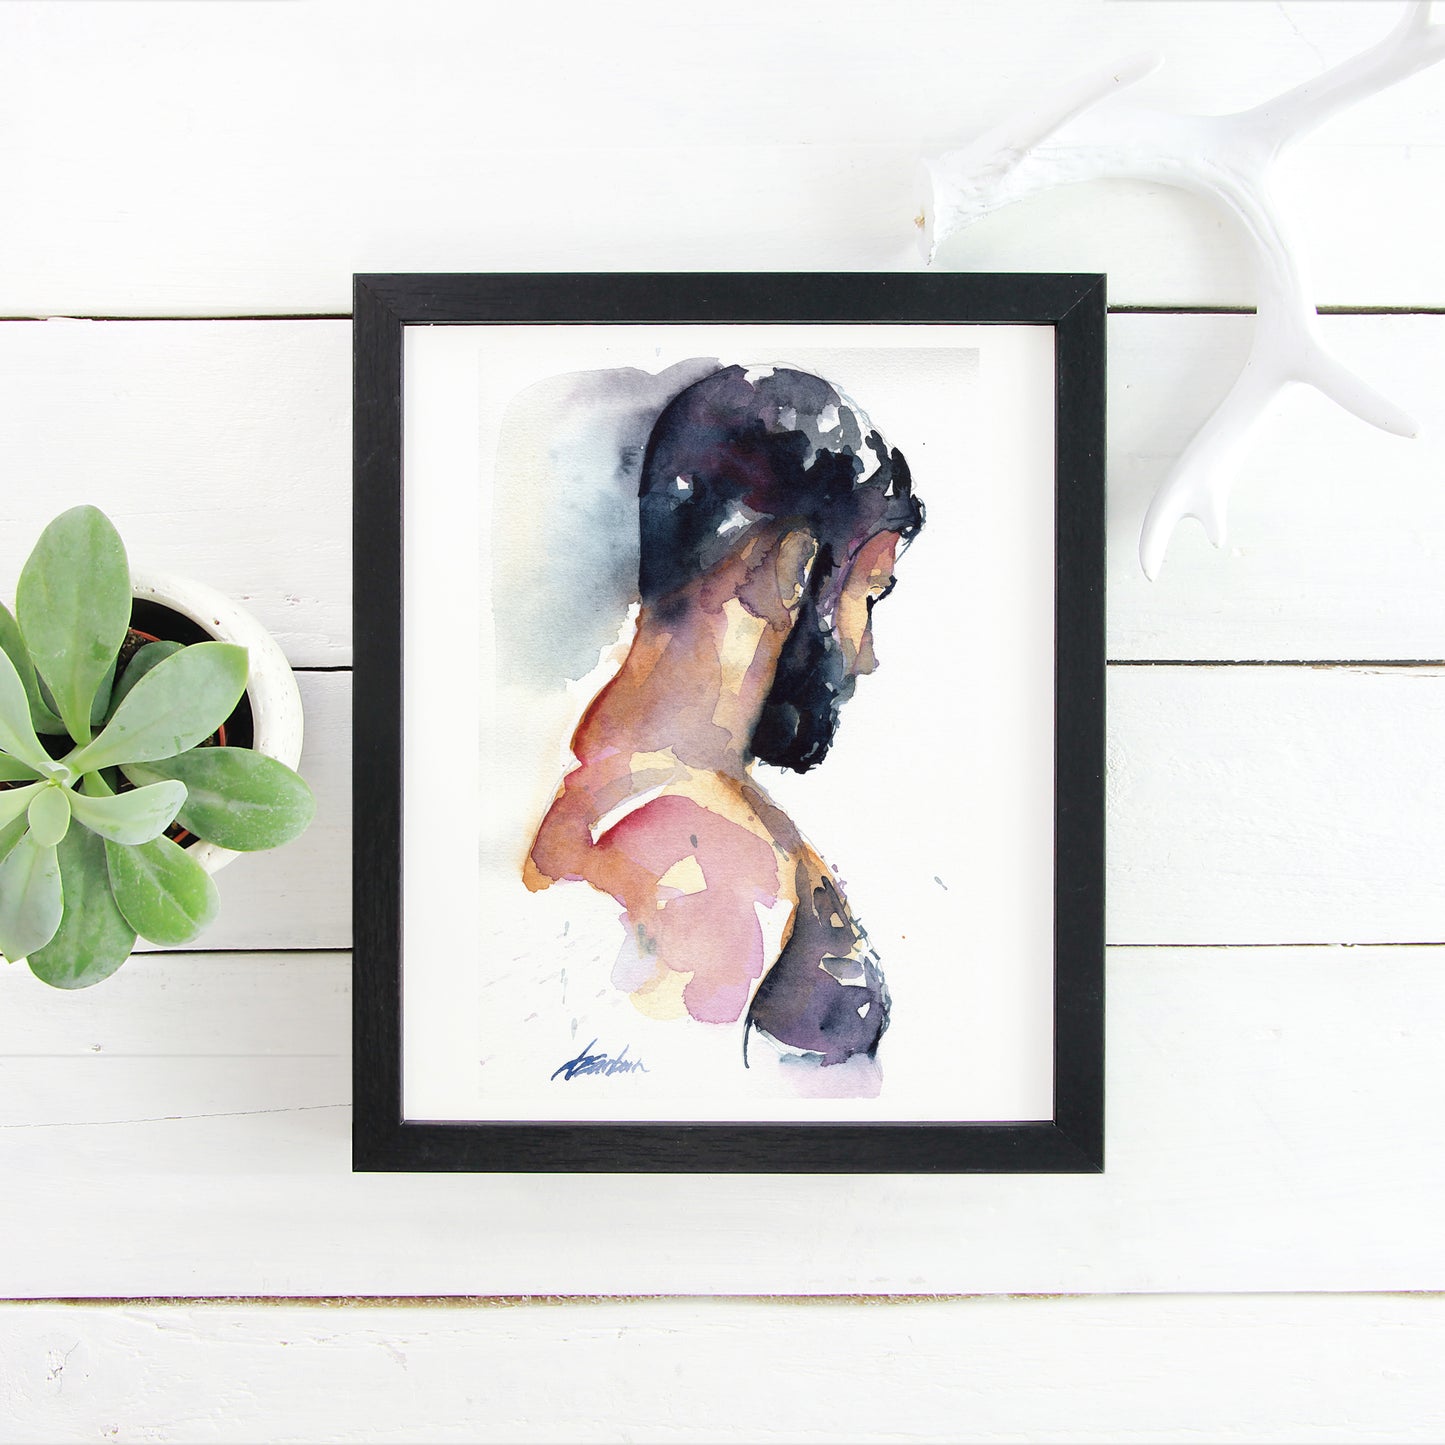 Shadowed Strength - Thick-Haired Chest - 6x9" Original Watercolor Painting